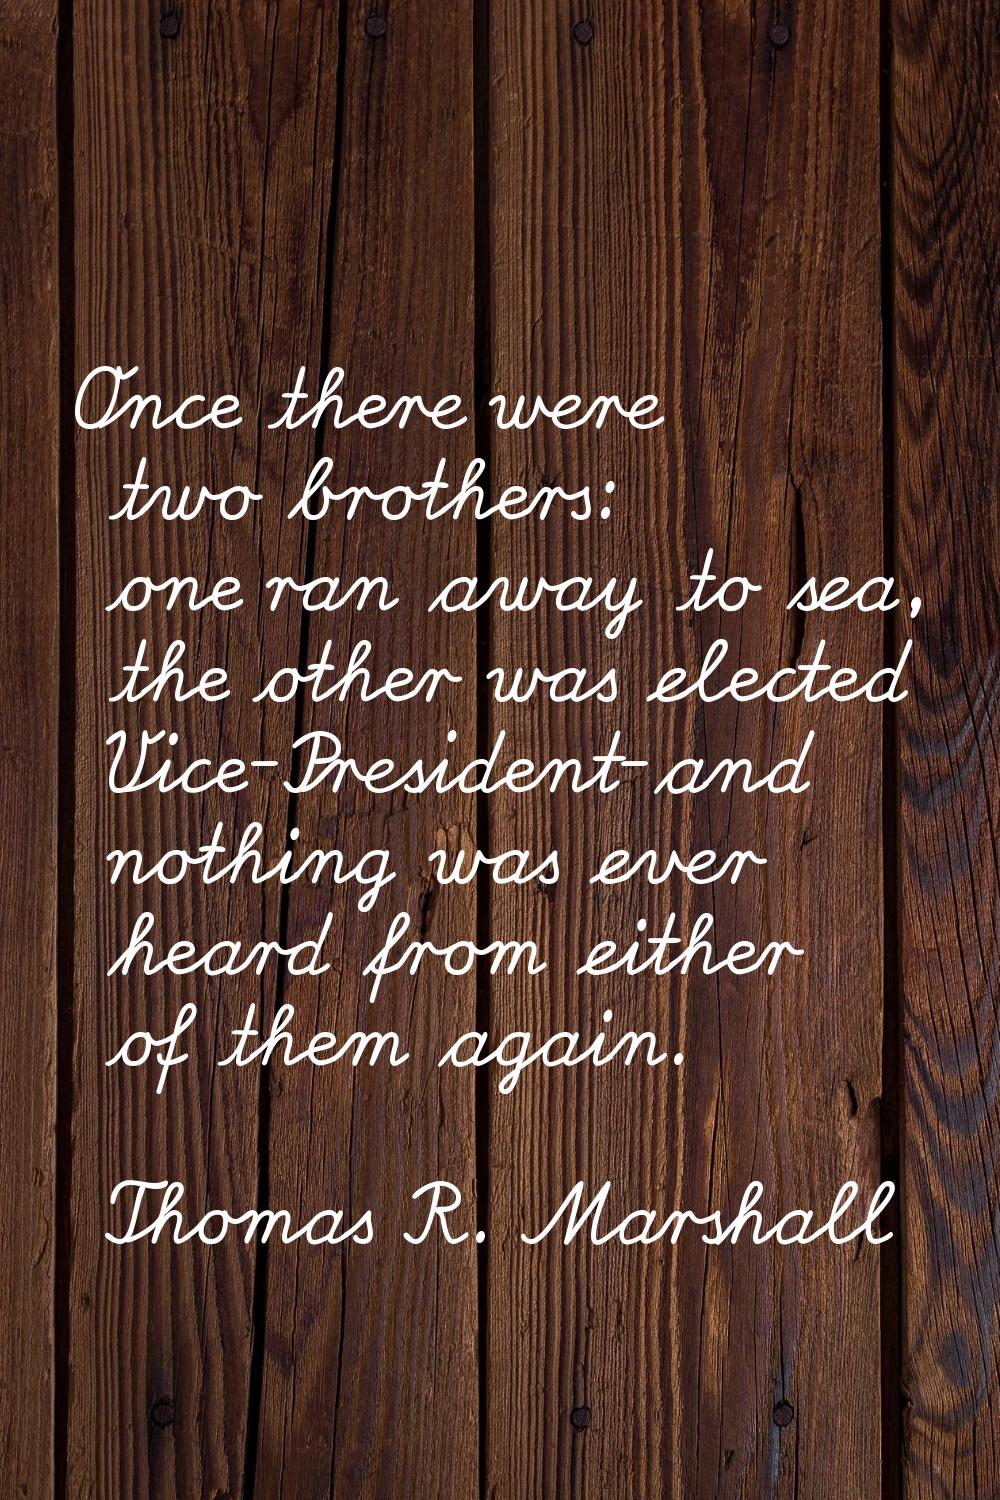 Once there were two brothers: one ran away to sea, the other was elected Vice-President-and nothing